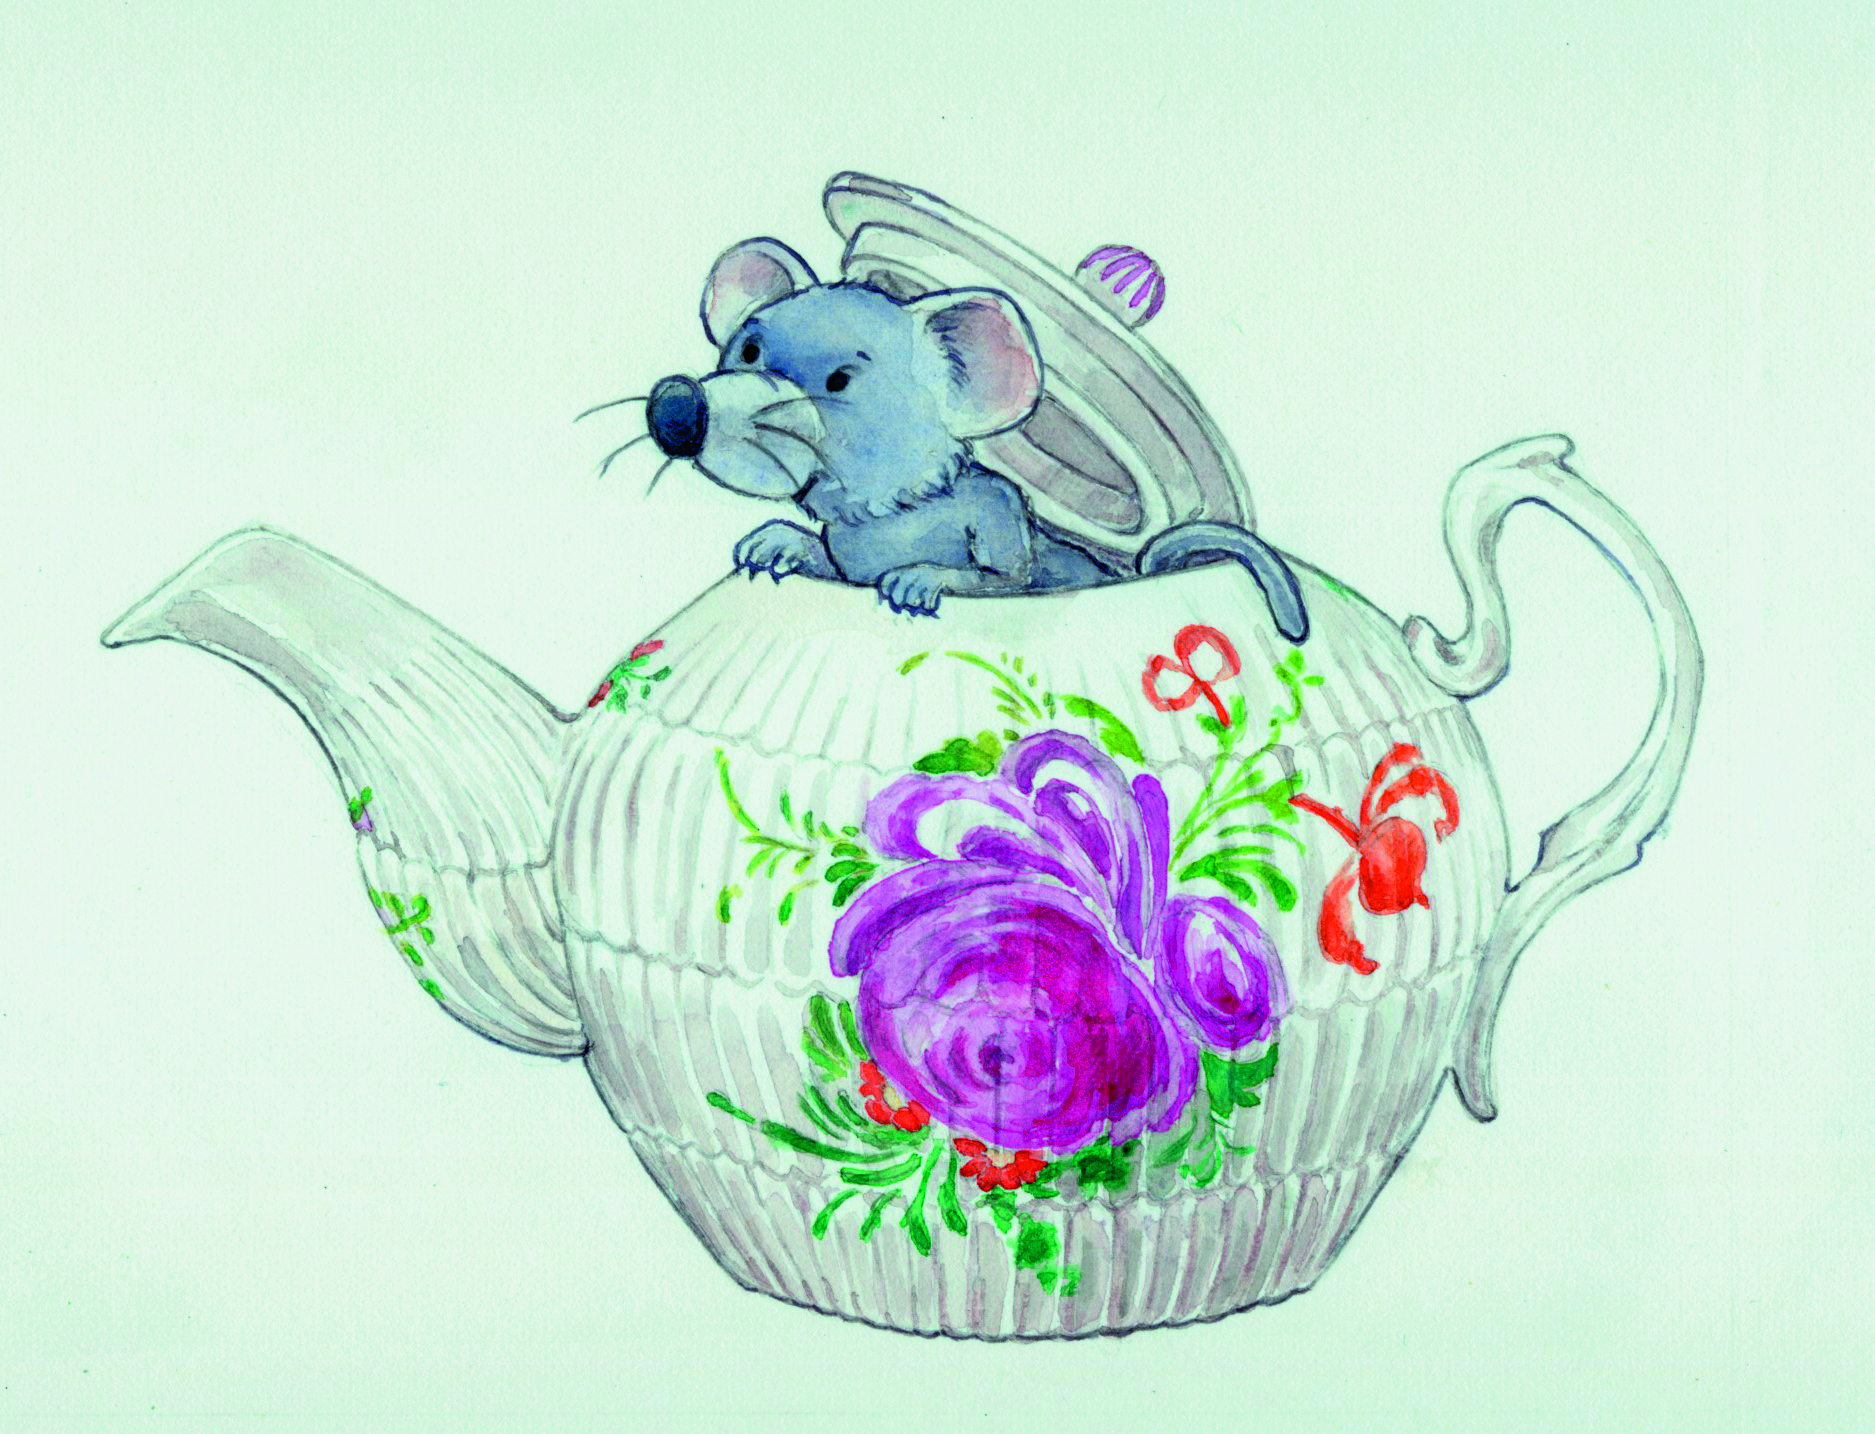 Illustration of Tippi the Tea Mouse peeking out of a teapot